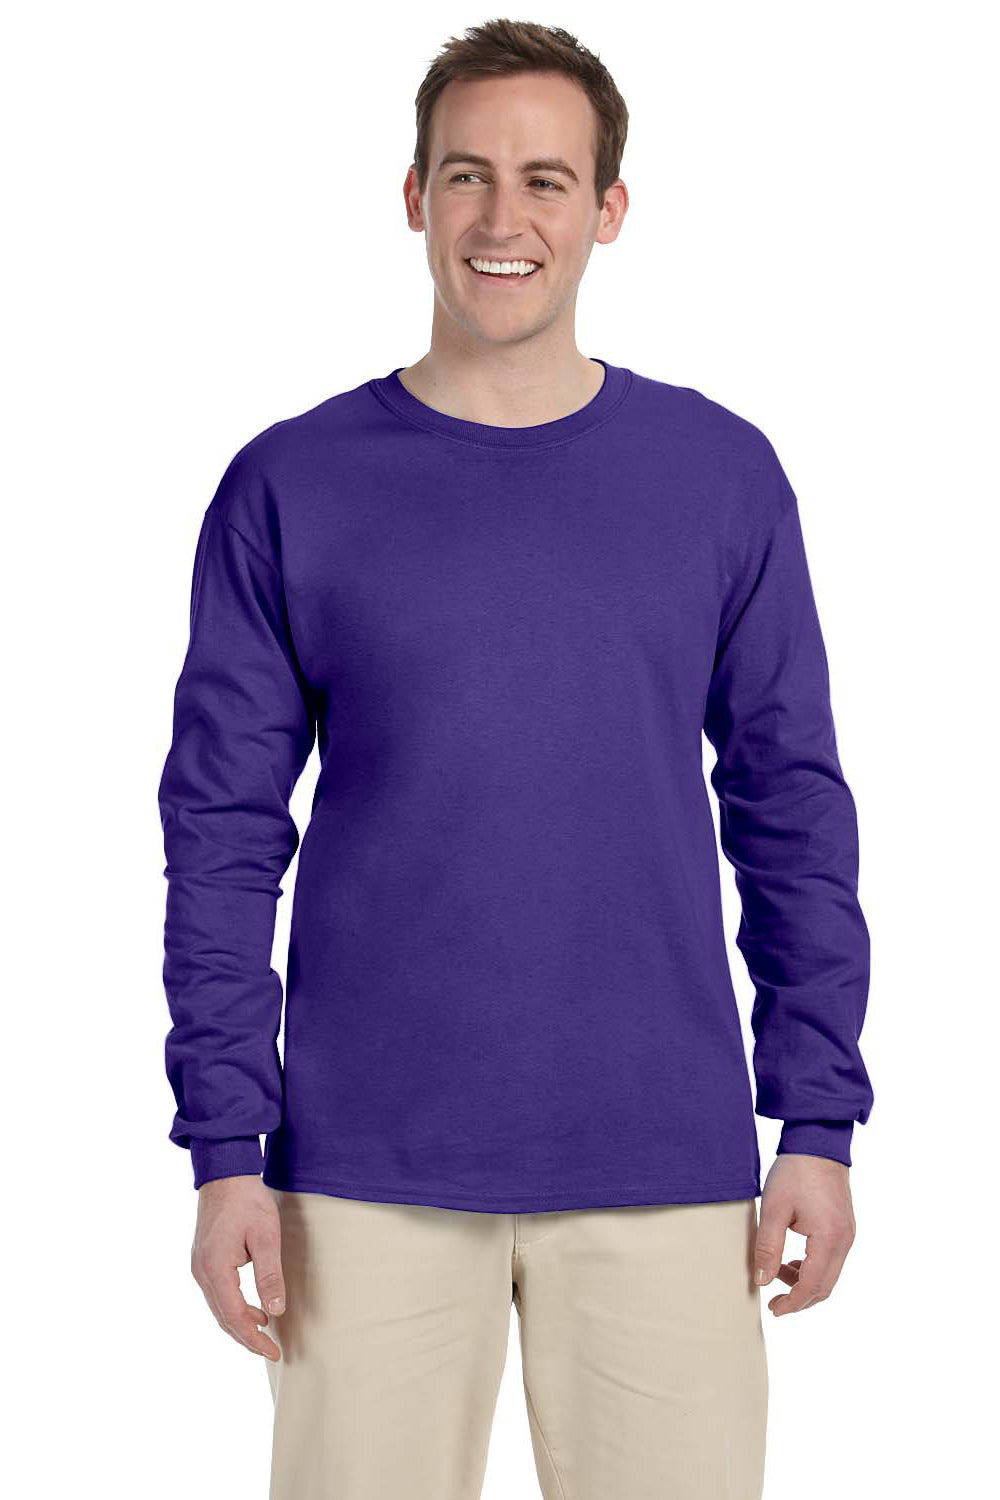 Fruit Of The Loom 4930 Mens HD Jersey Long Sleeve Crewneck T-Shirt Purple Front